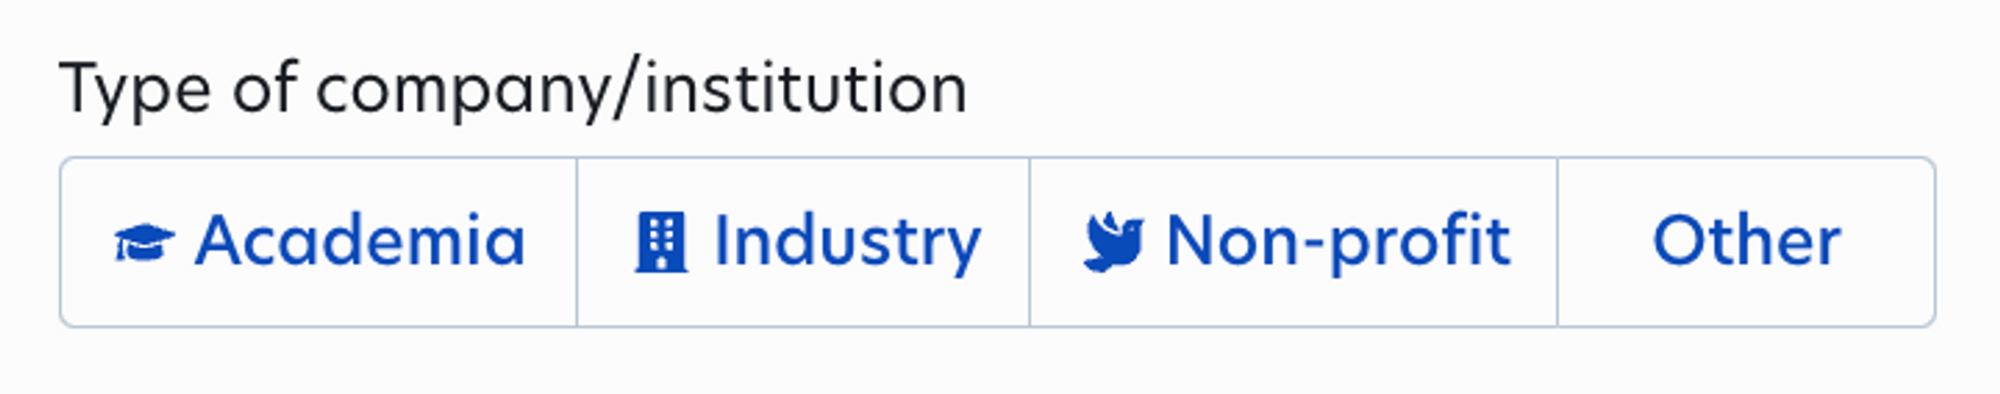 Type of company:institution.png